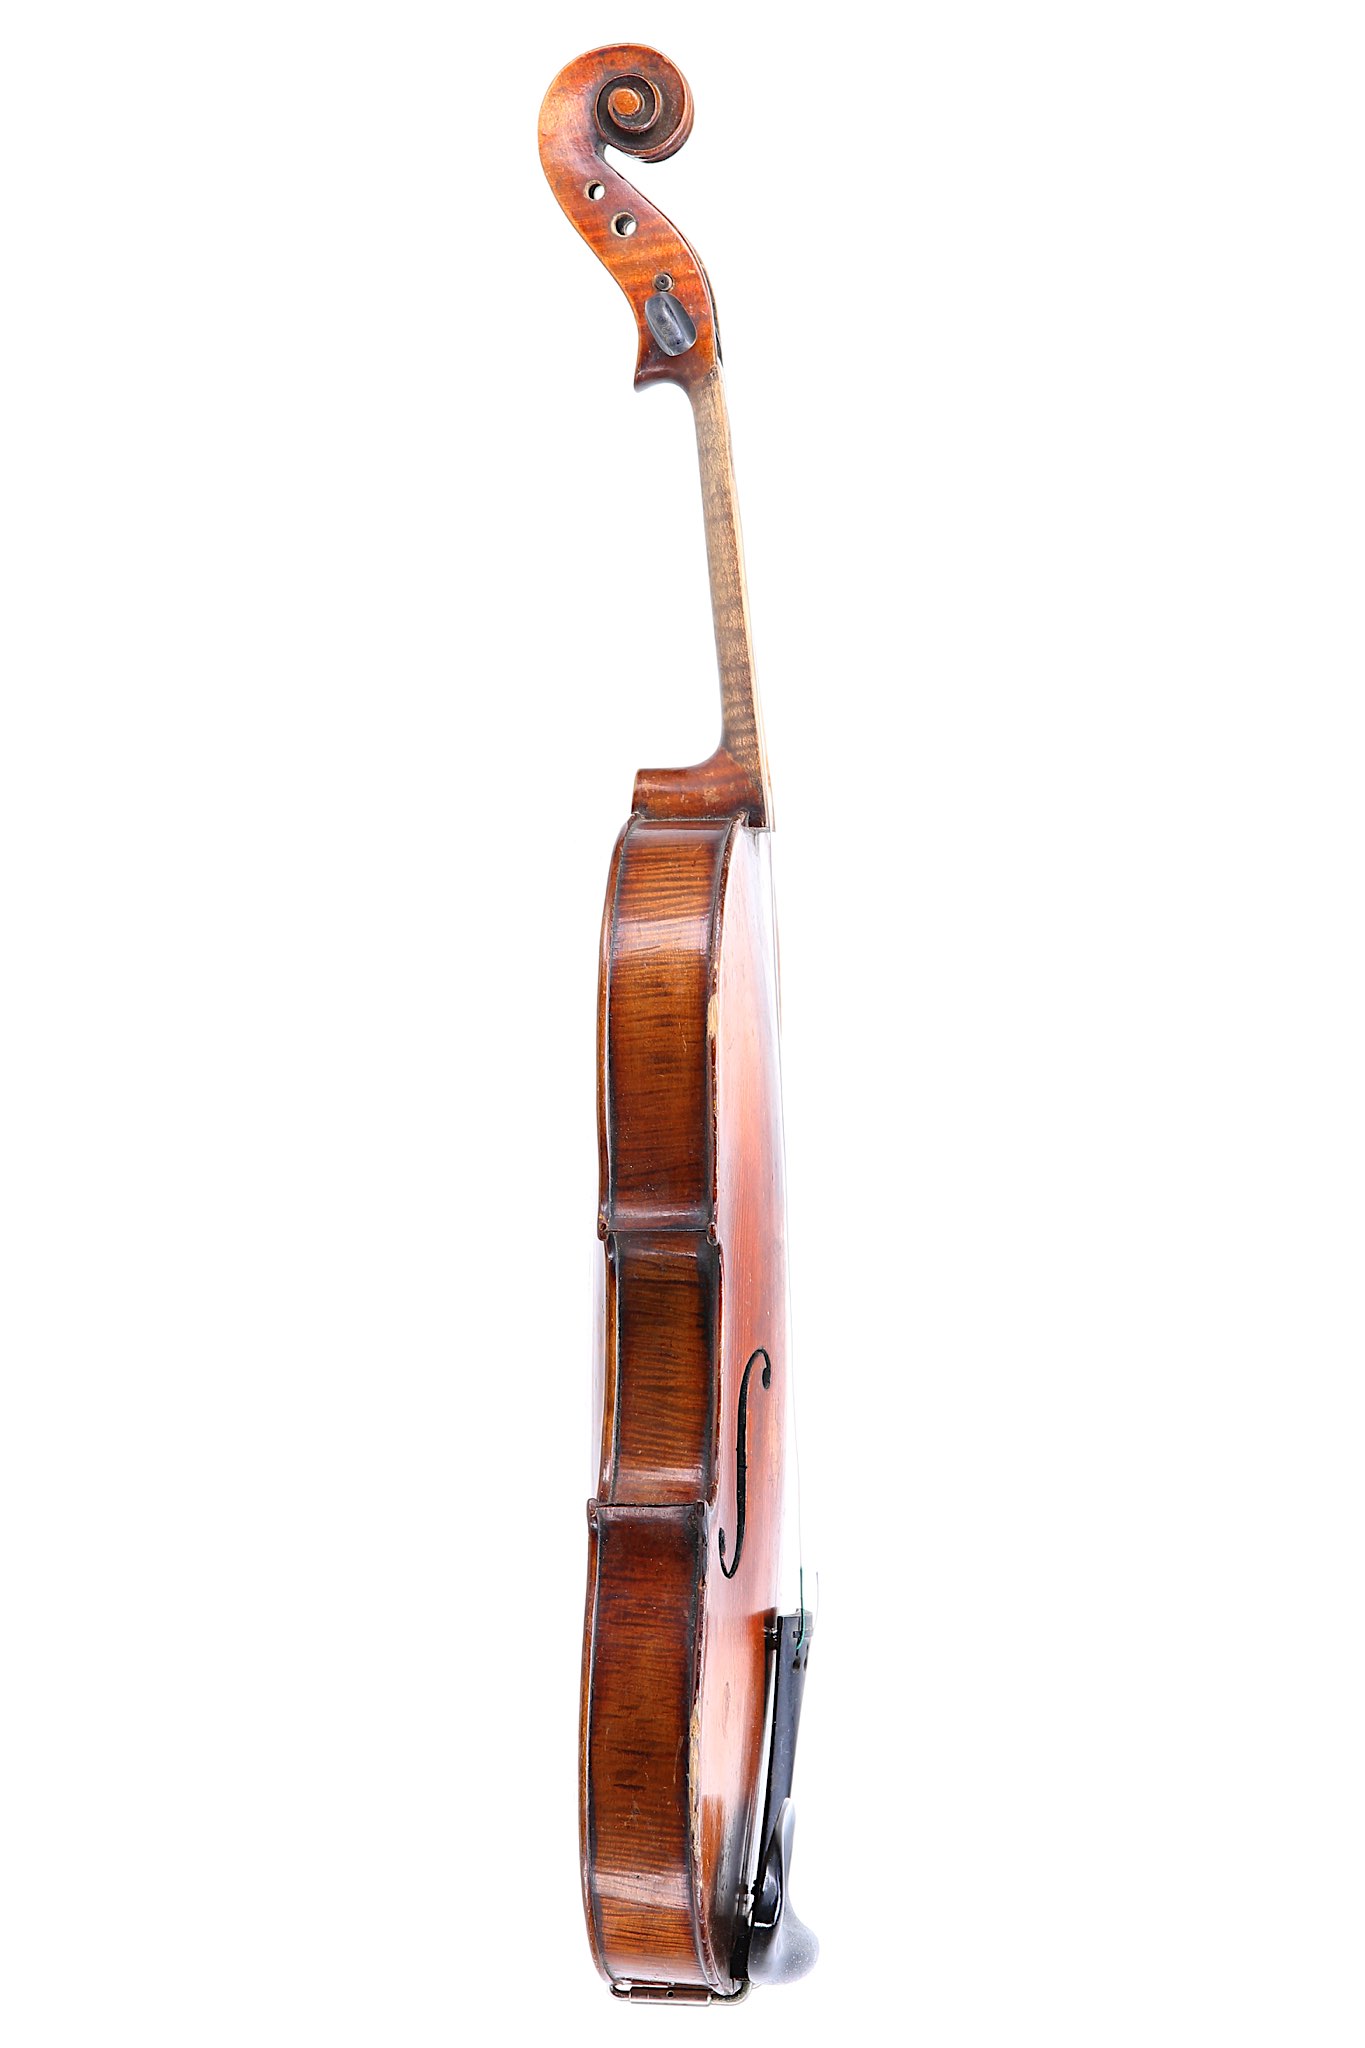 German violin. Early 20th century. No labelled. Two piece back ,medium figure flame maple wood, - Image 3 of 8